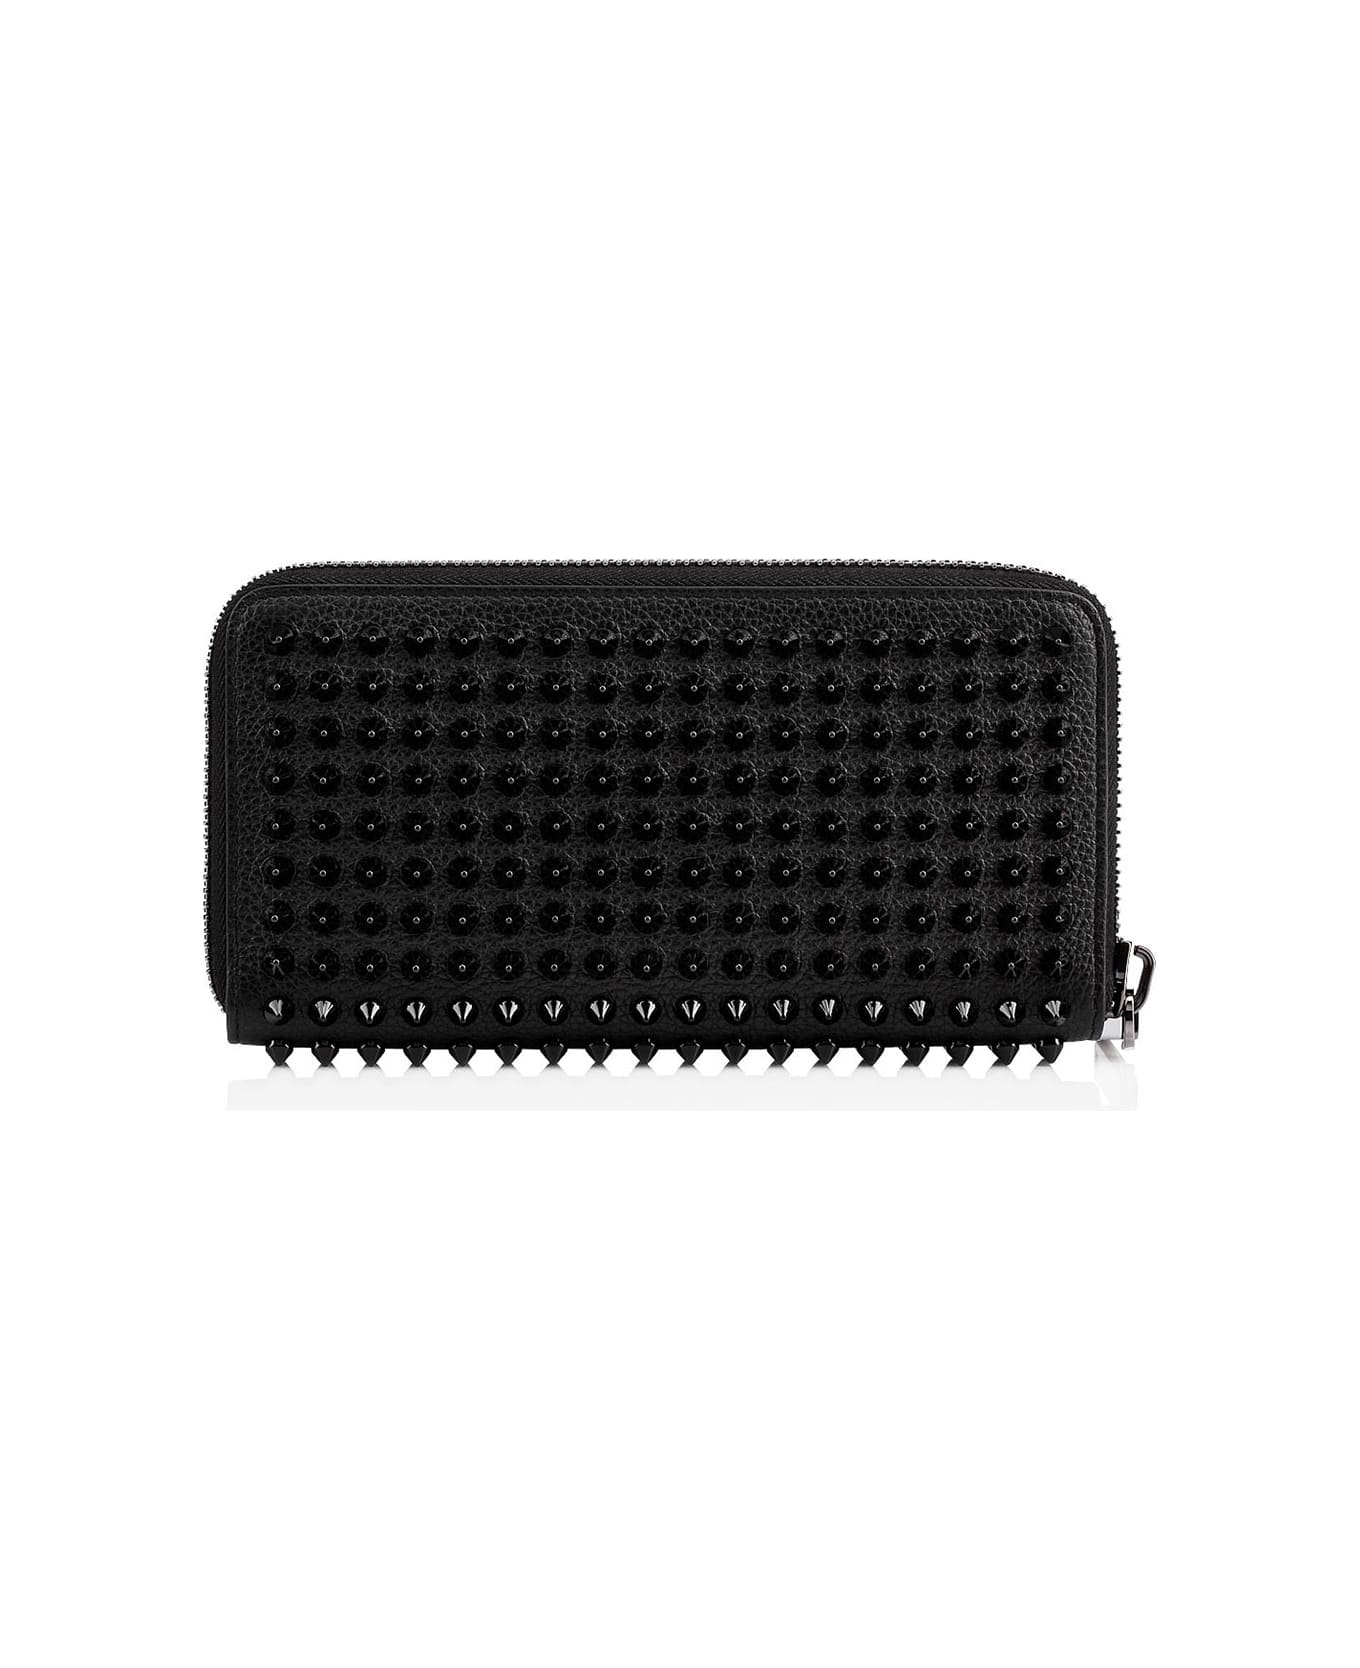 Christian Louboutin Leather Panettone Wallet With Spikes - Black 財布